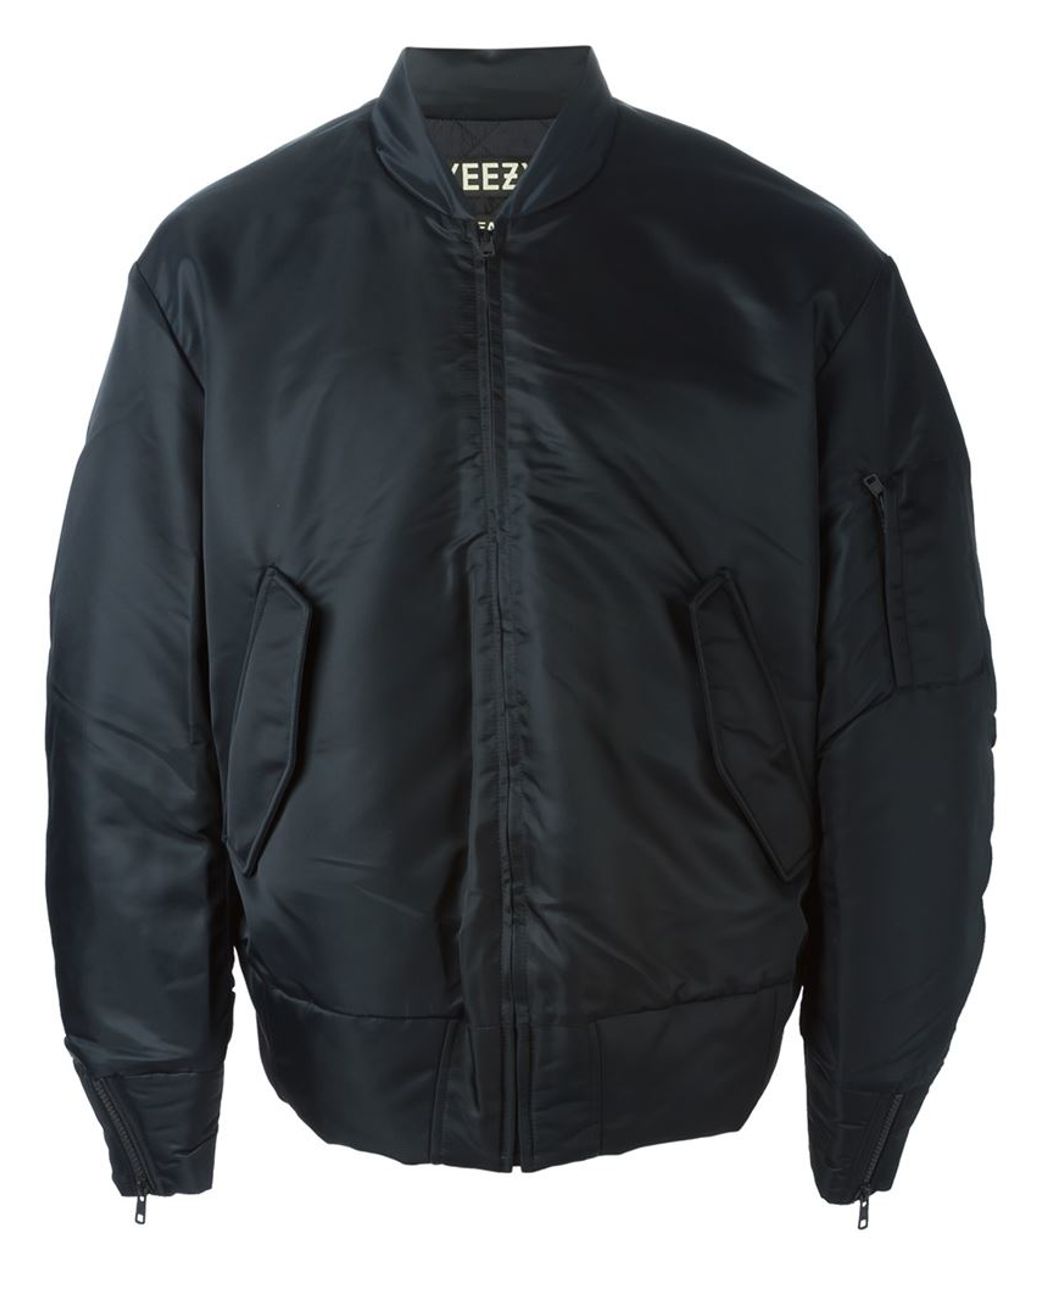 Yeezy Adidas Originals By Kanye West Bomber Jacket in Black for 